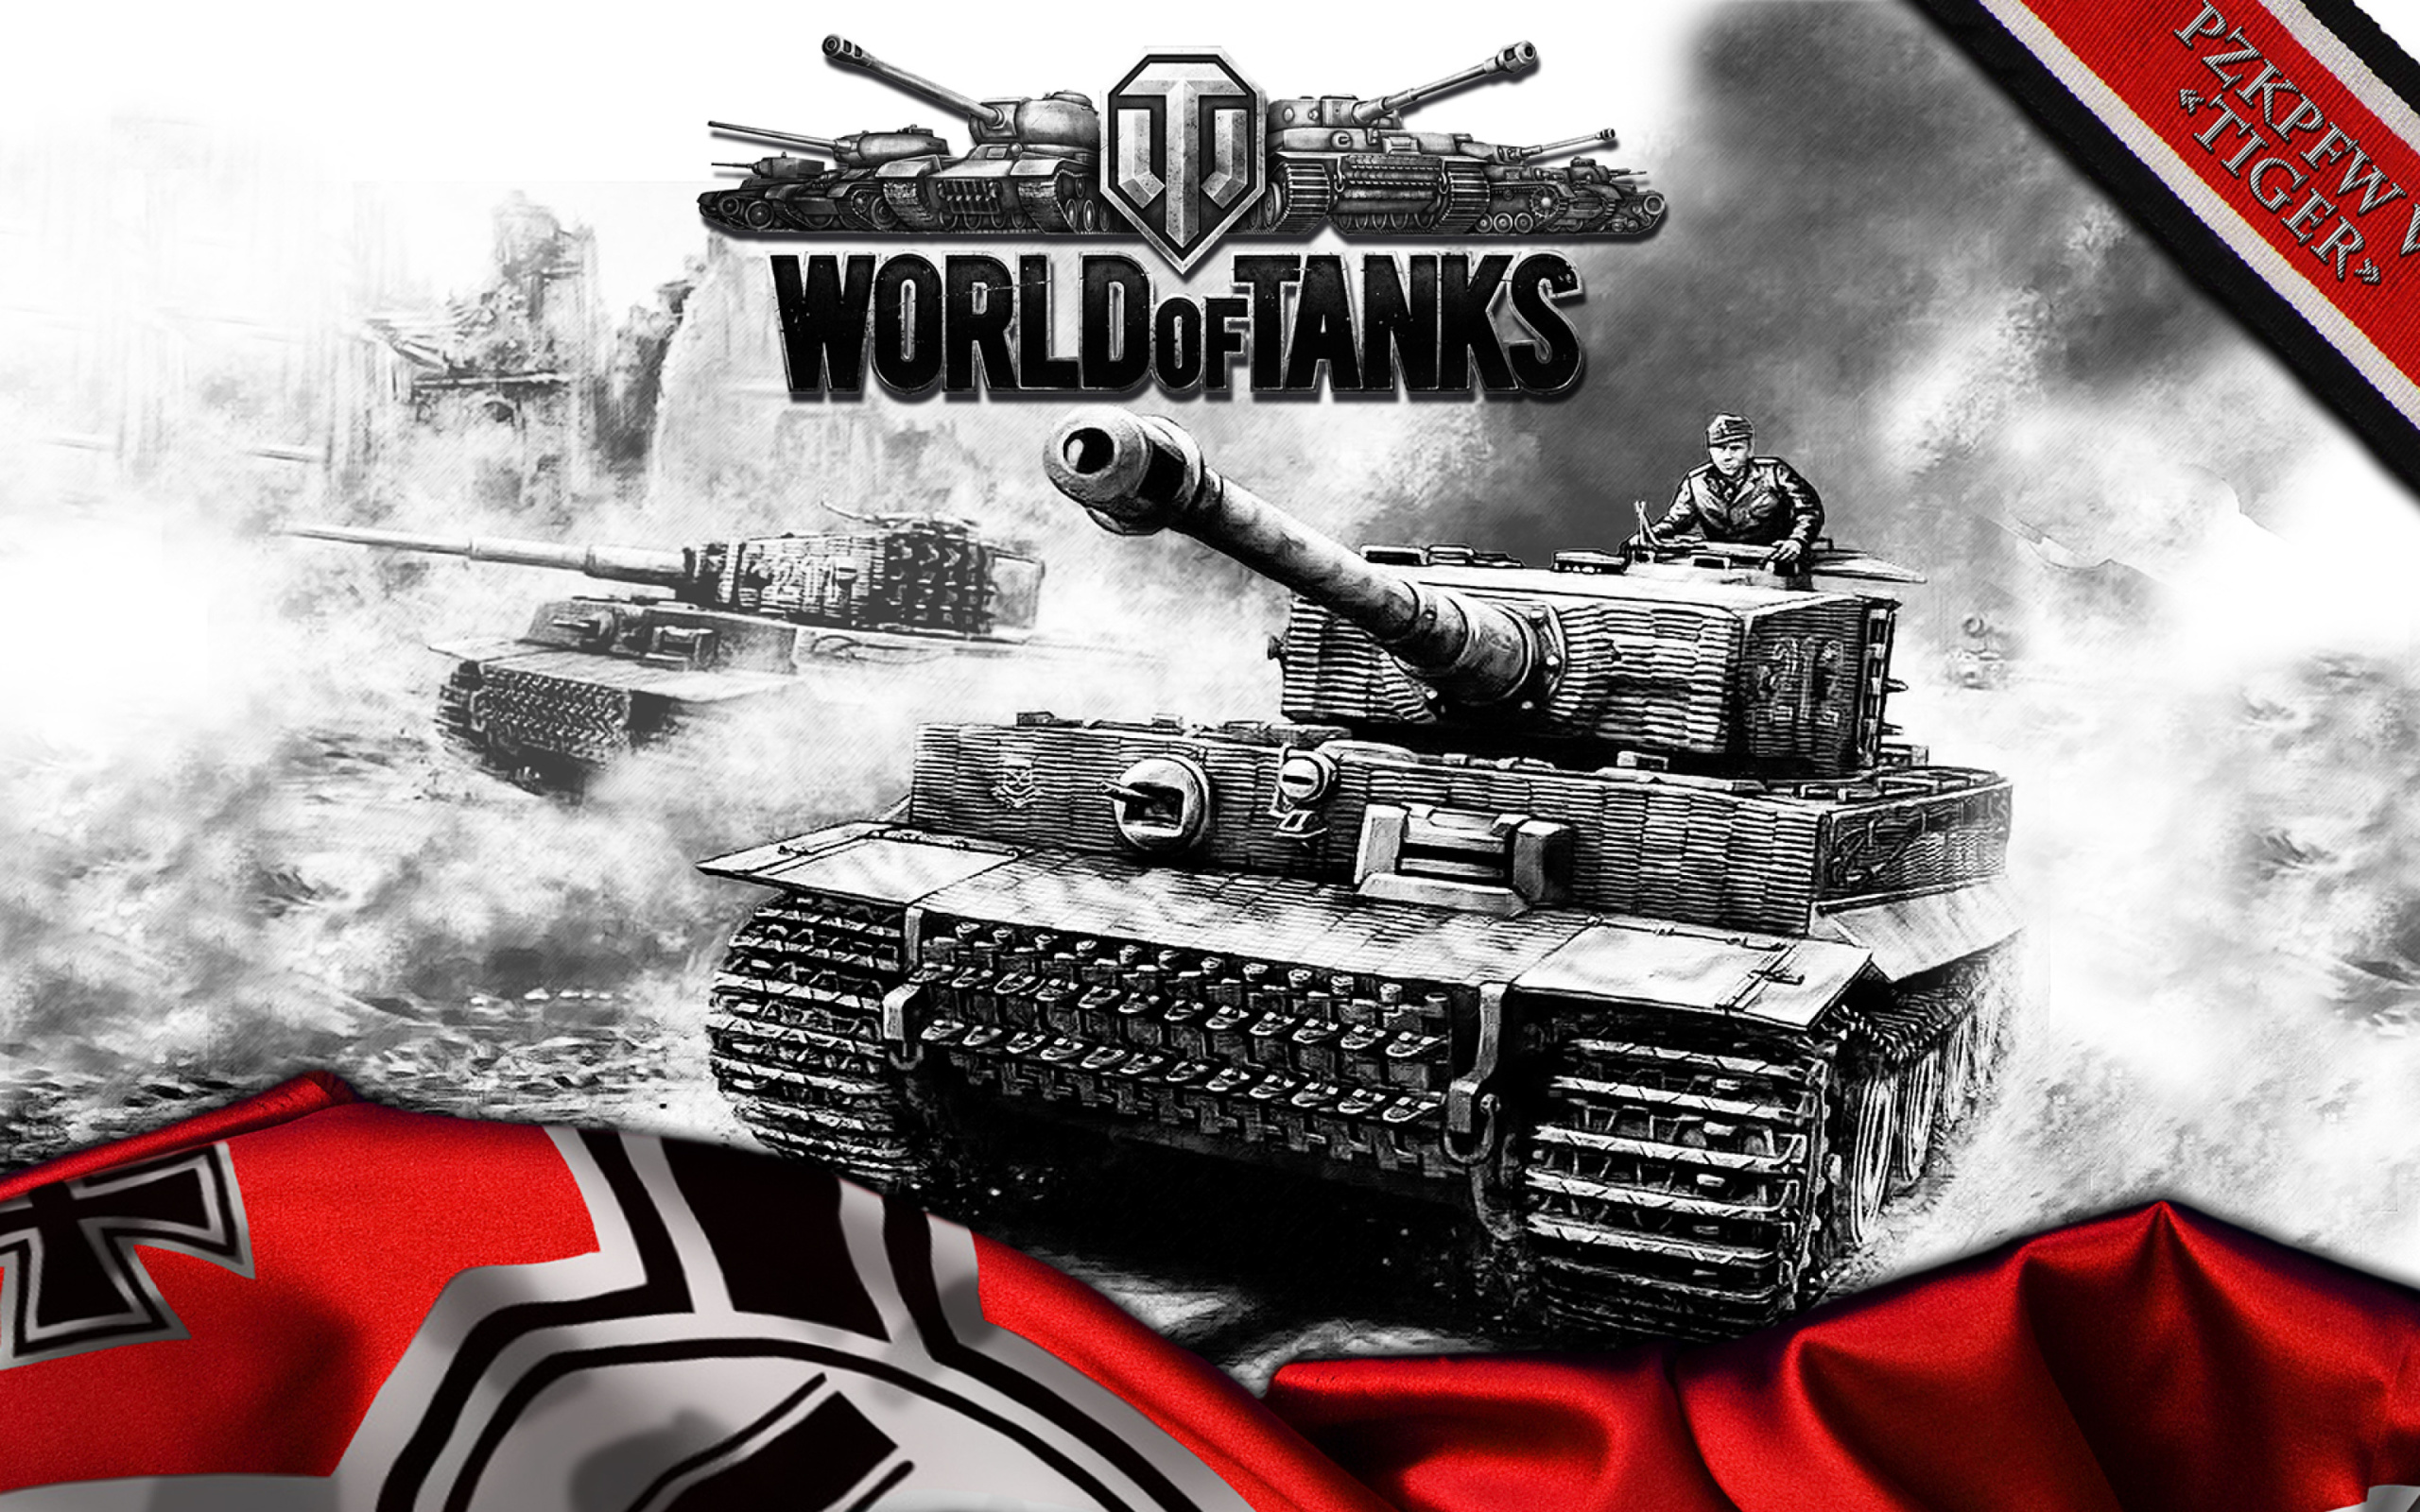 World of Tanks with Tiger Tank wallpaper 2560x1600